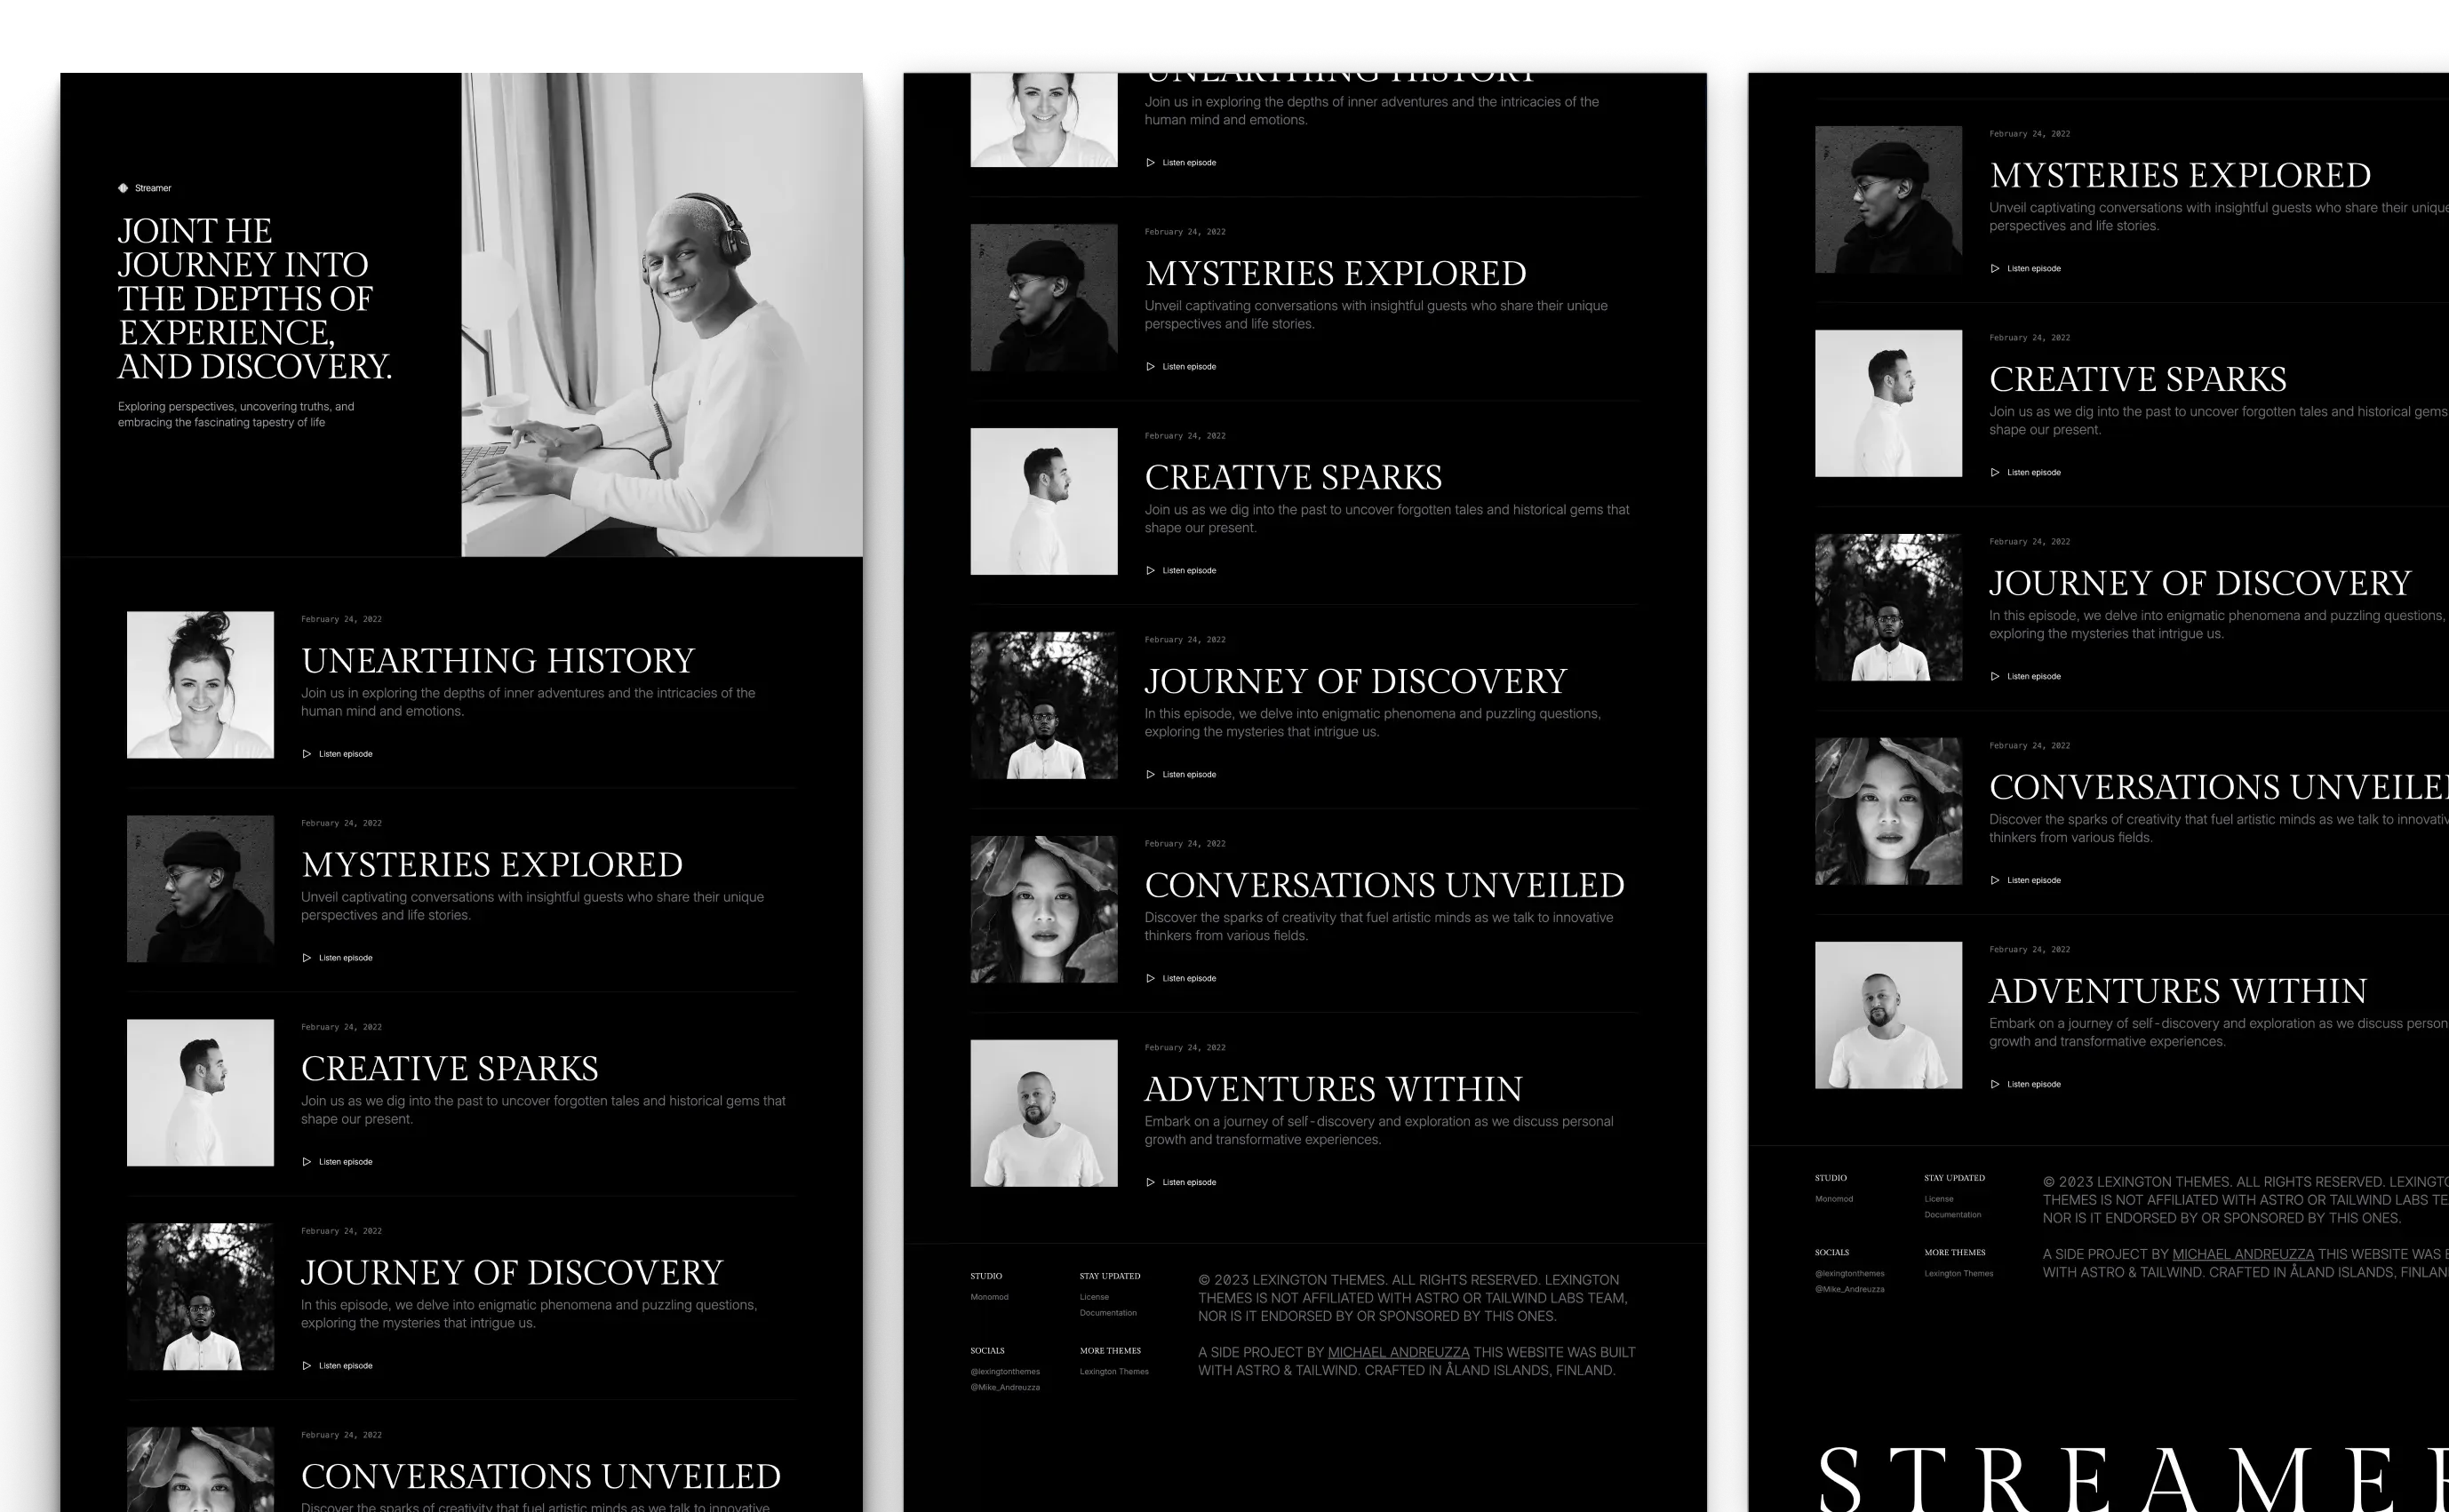 Streamer theme with a black and white aesthetic featuring a smiling person wearing headphones at a desk. The header invites readers to 'Join the journey into the depths of experience, and discovery,' setting a tone of exploration and uncovering truths.